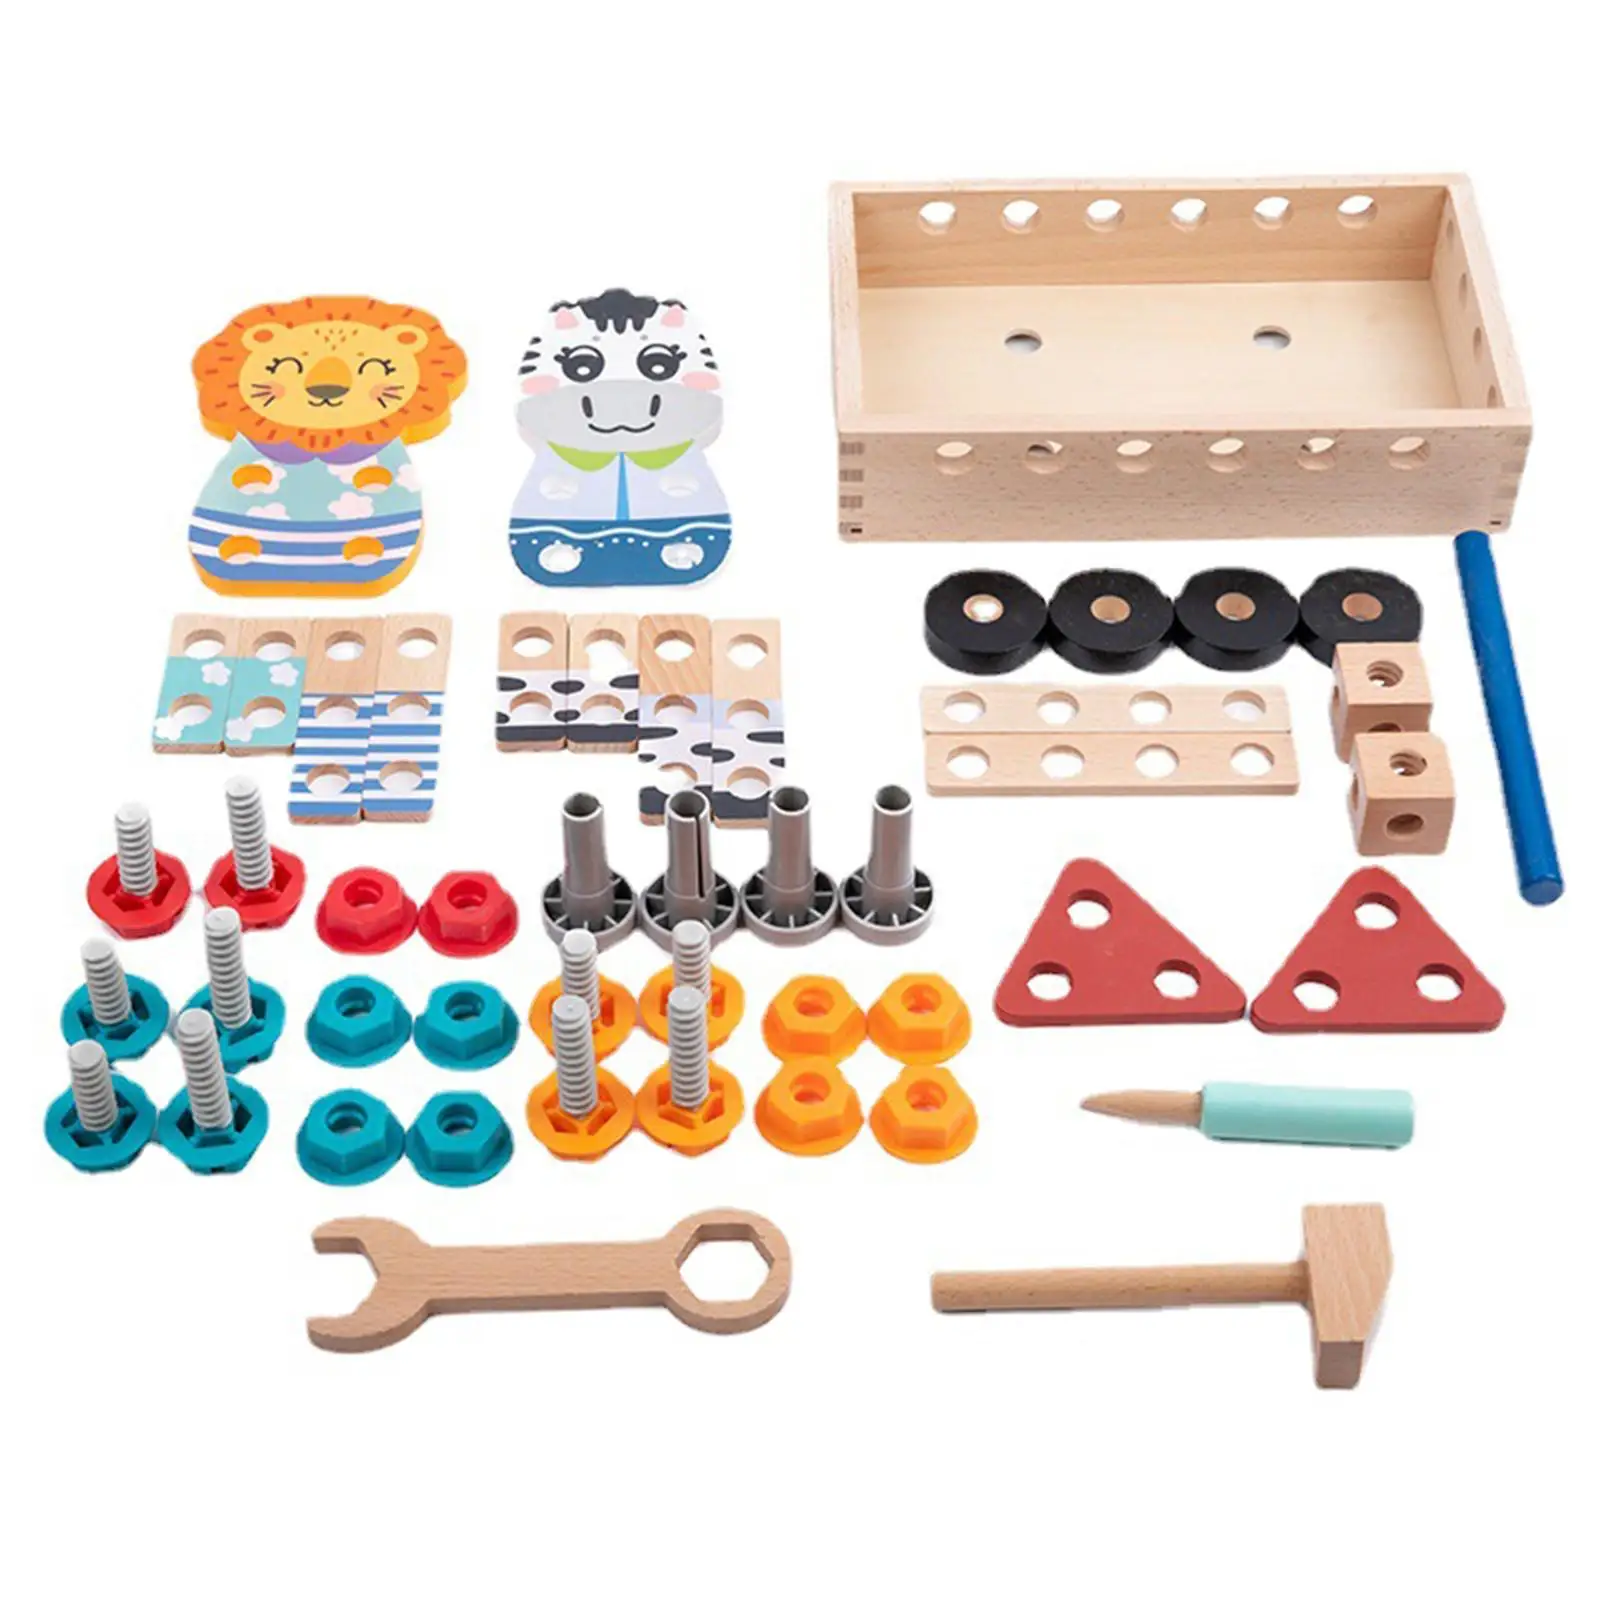 DIY Construction kids Toolbox Set for Activities Education Role Play